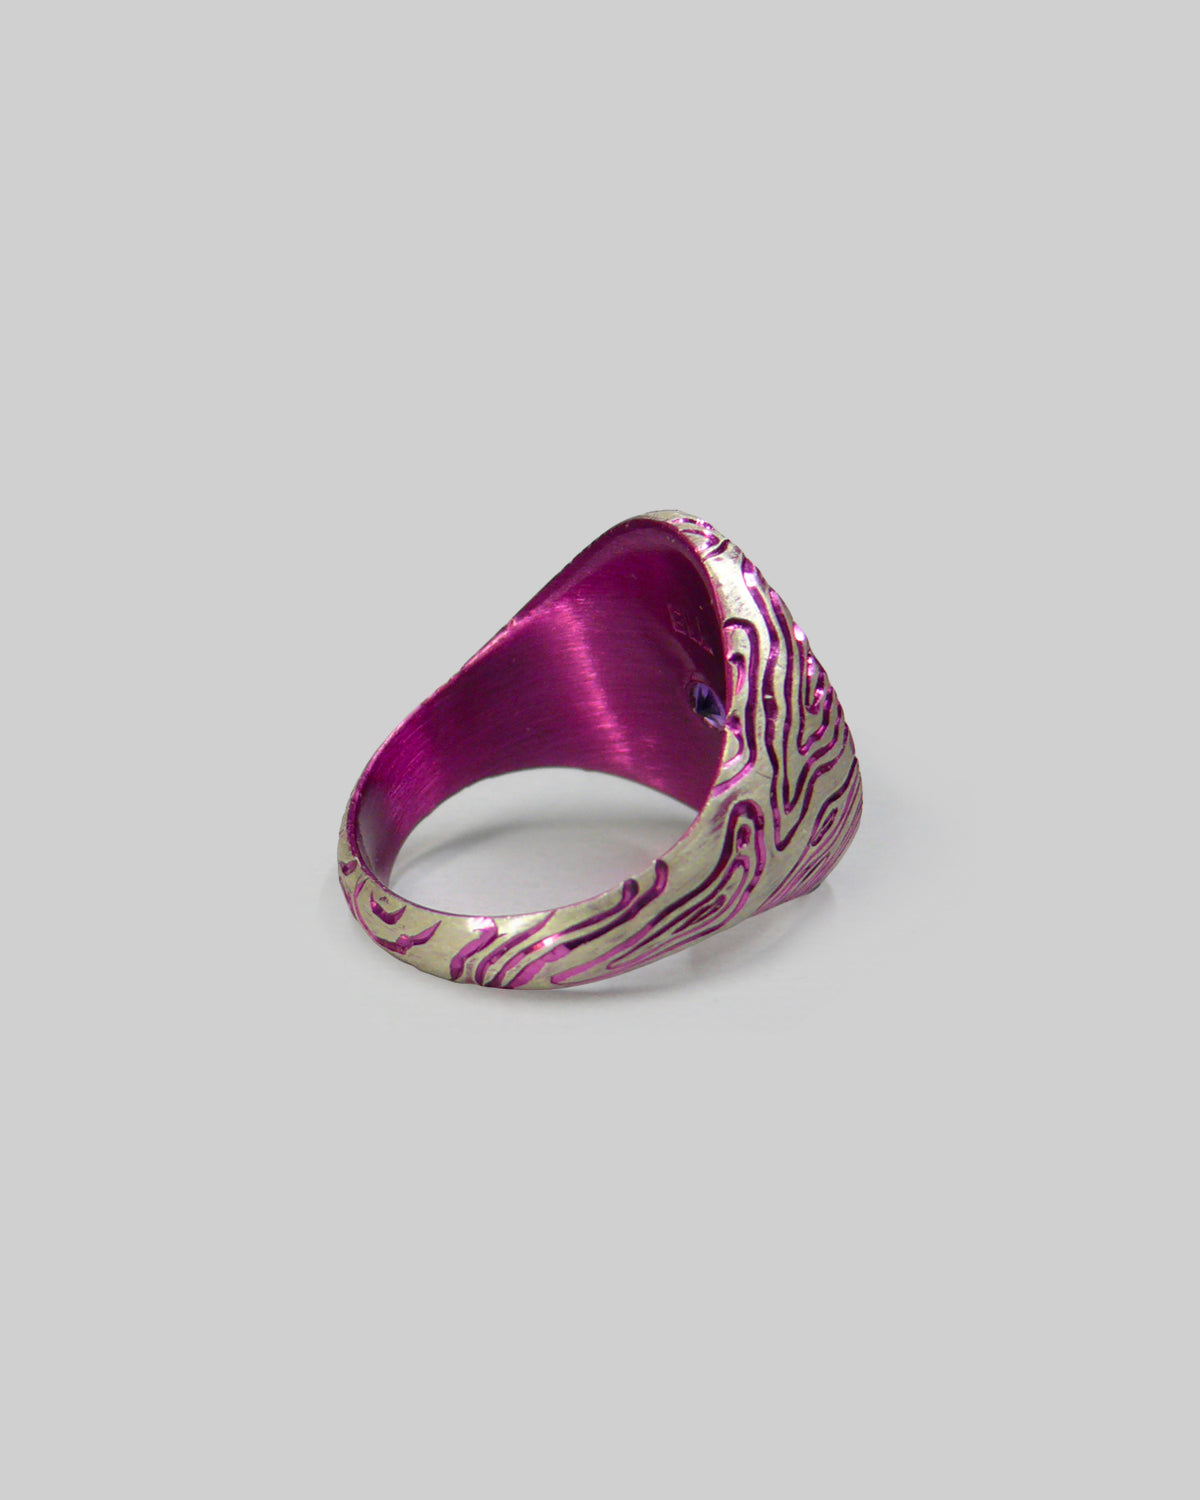 Cosmic Waves Ring - Amethyst and Pink Coating